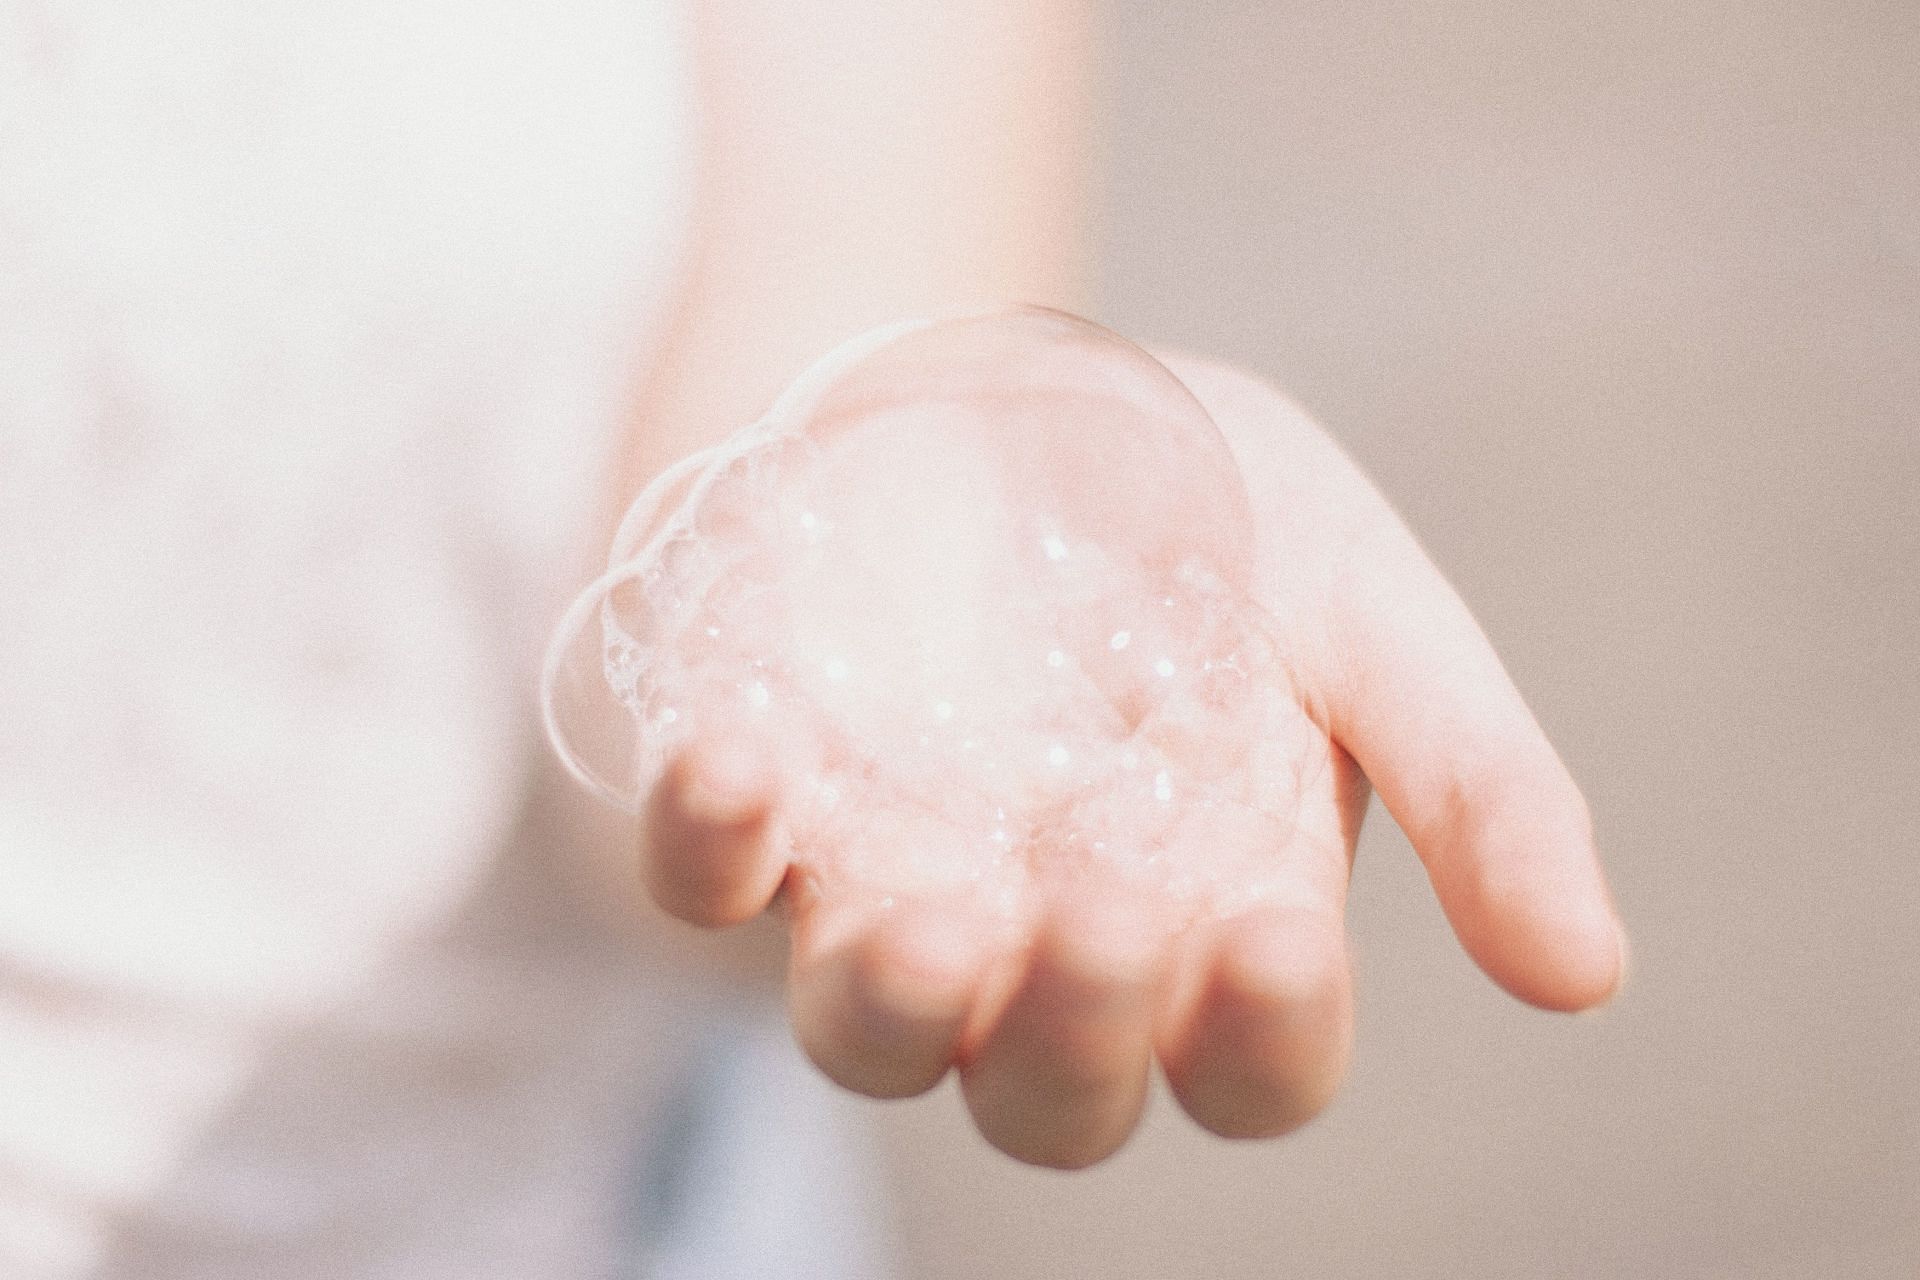 Homemade face scrub is cost-effective and can be largely chemical-free as compared to packaged products (Image via Unsplash/Mathew)